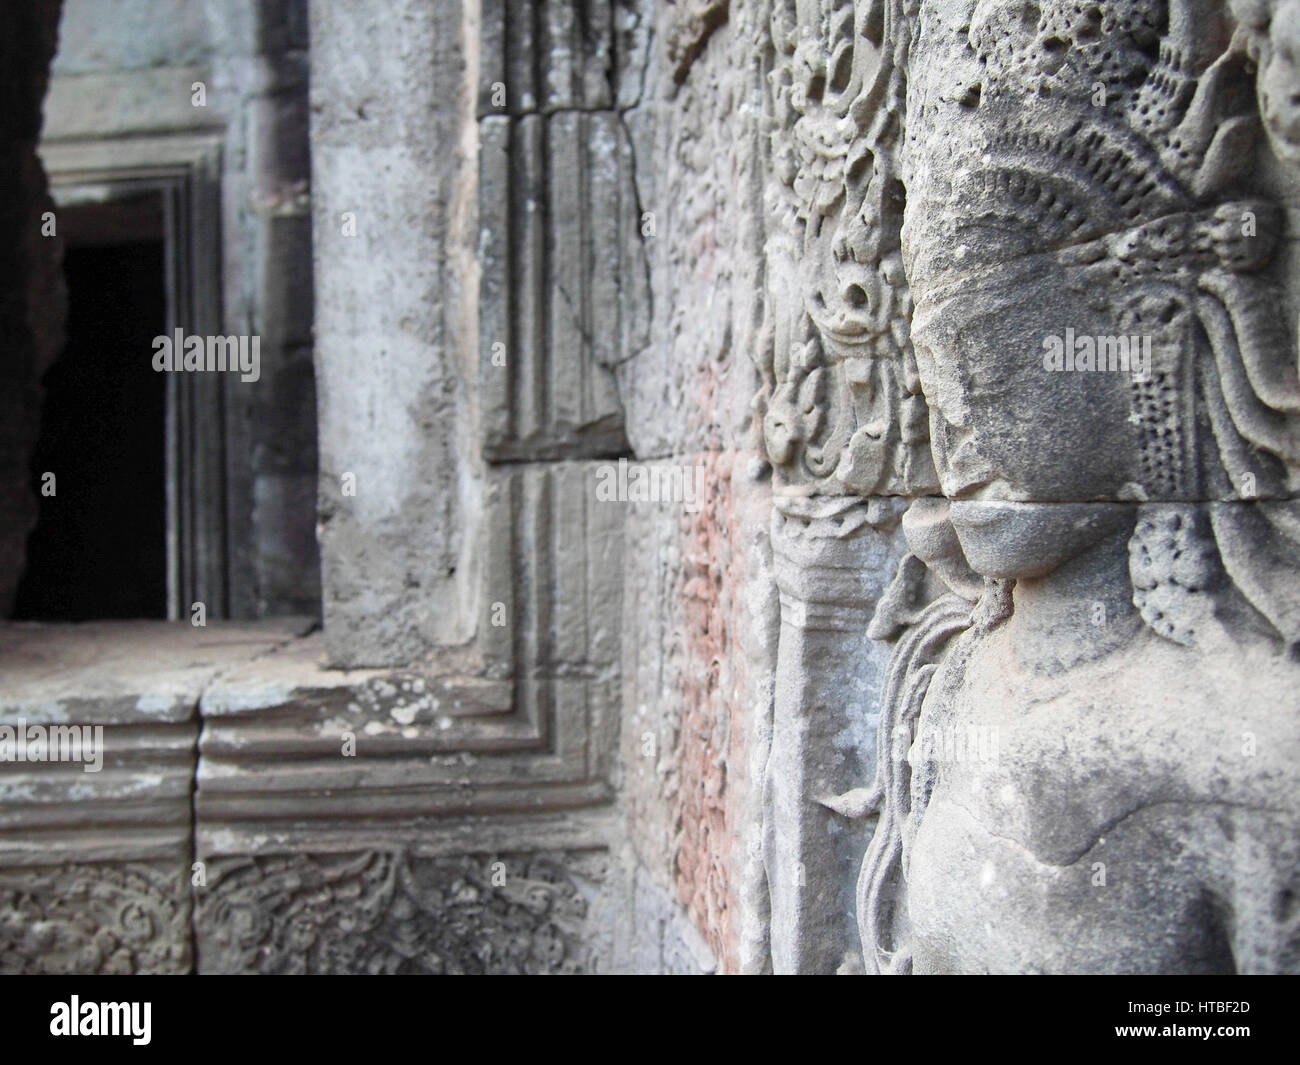 Carving at an ancient temple in Indonesia. Stock Photo